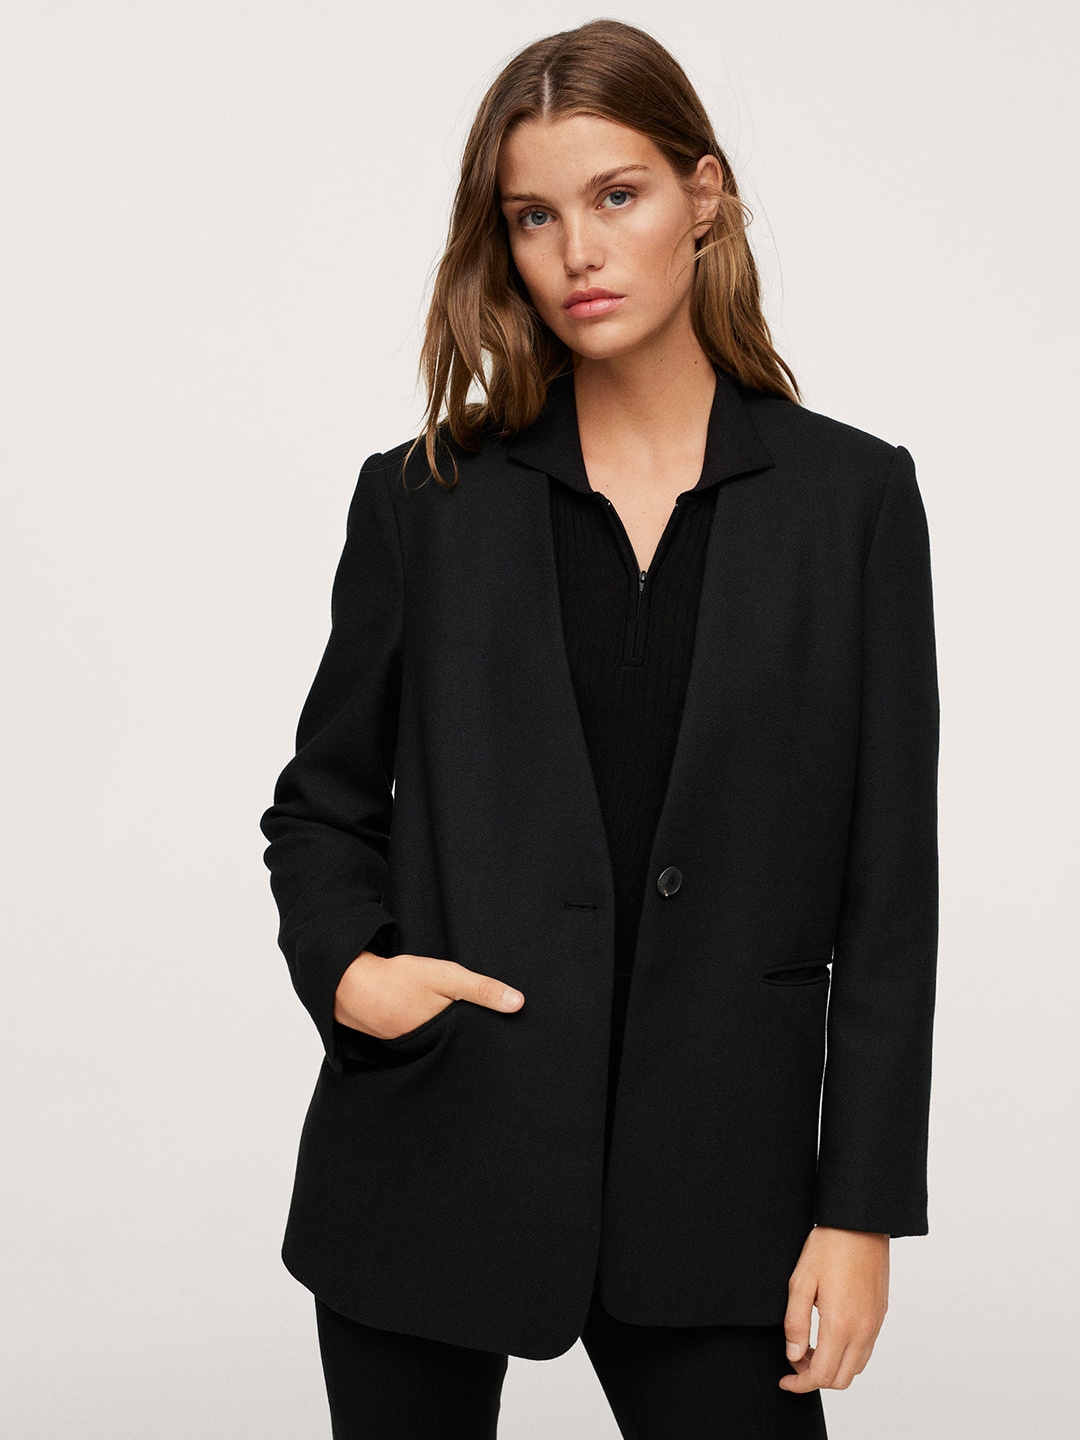 MANGO Women Black Solid Structured Single-Breasted Blazer Price in India